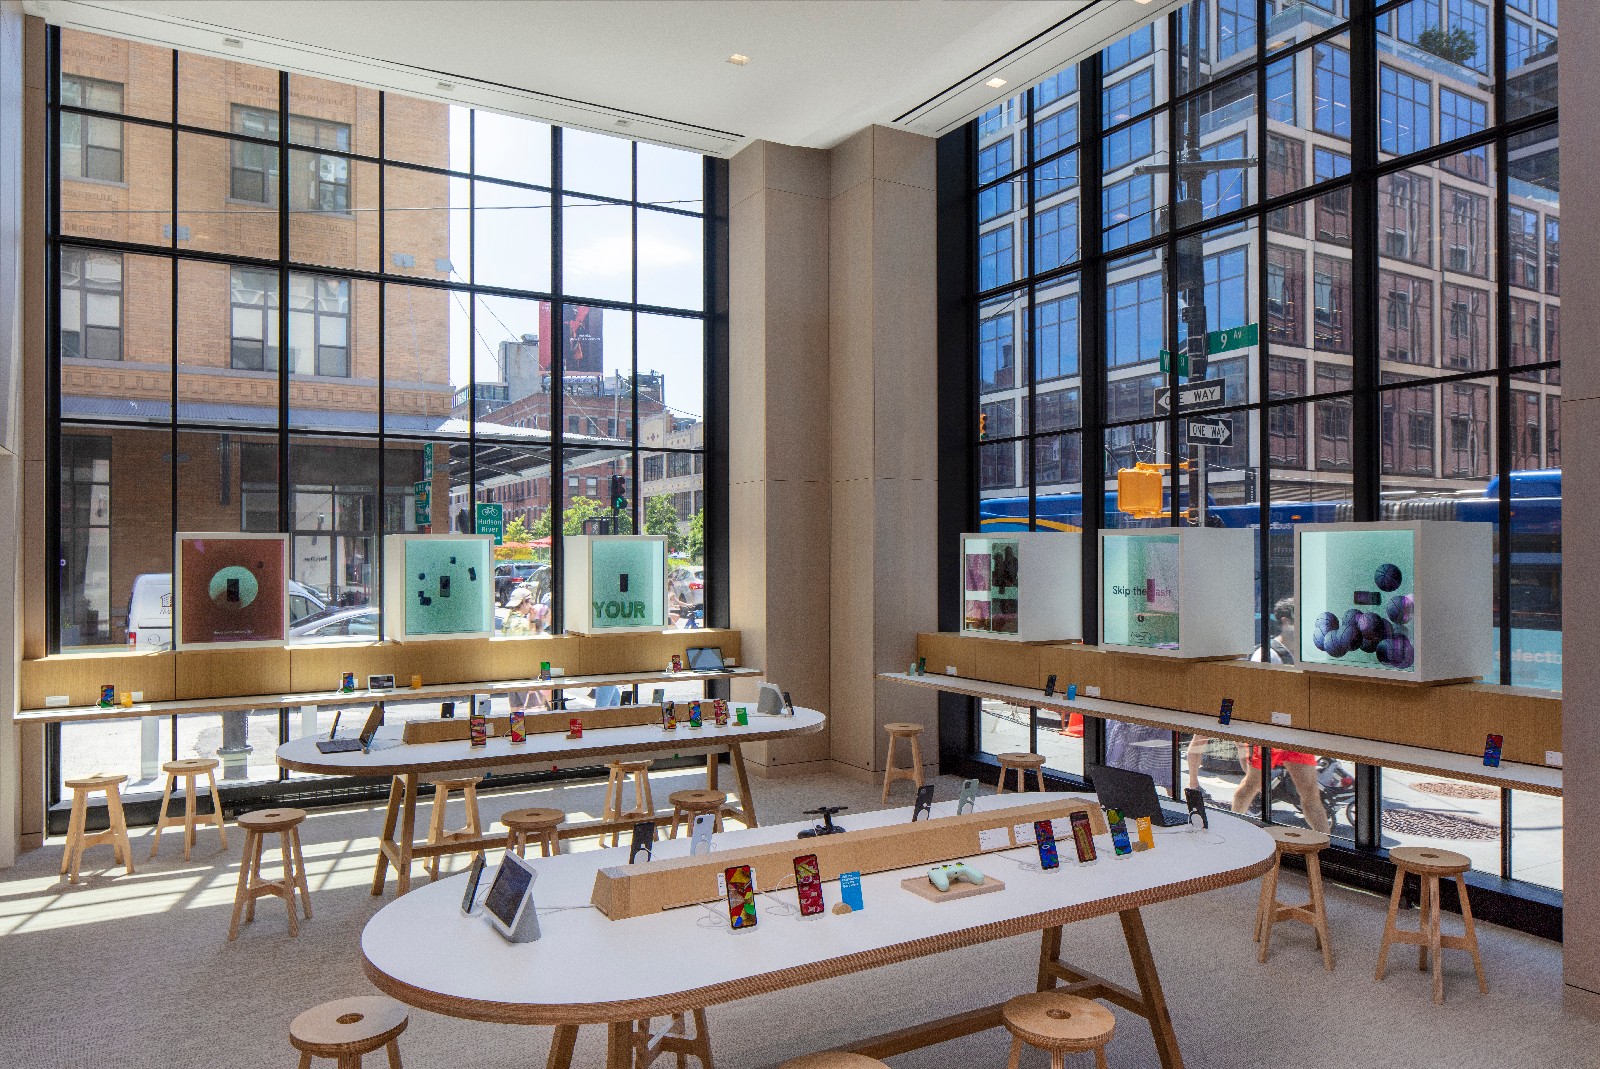 Google's first retail store is a space to sell, fix and show off its products